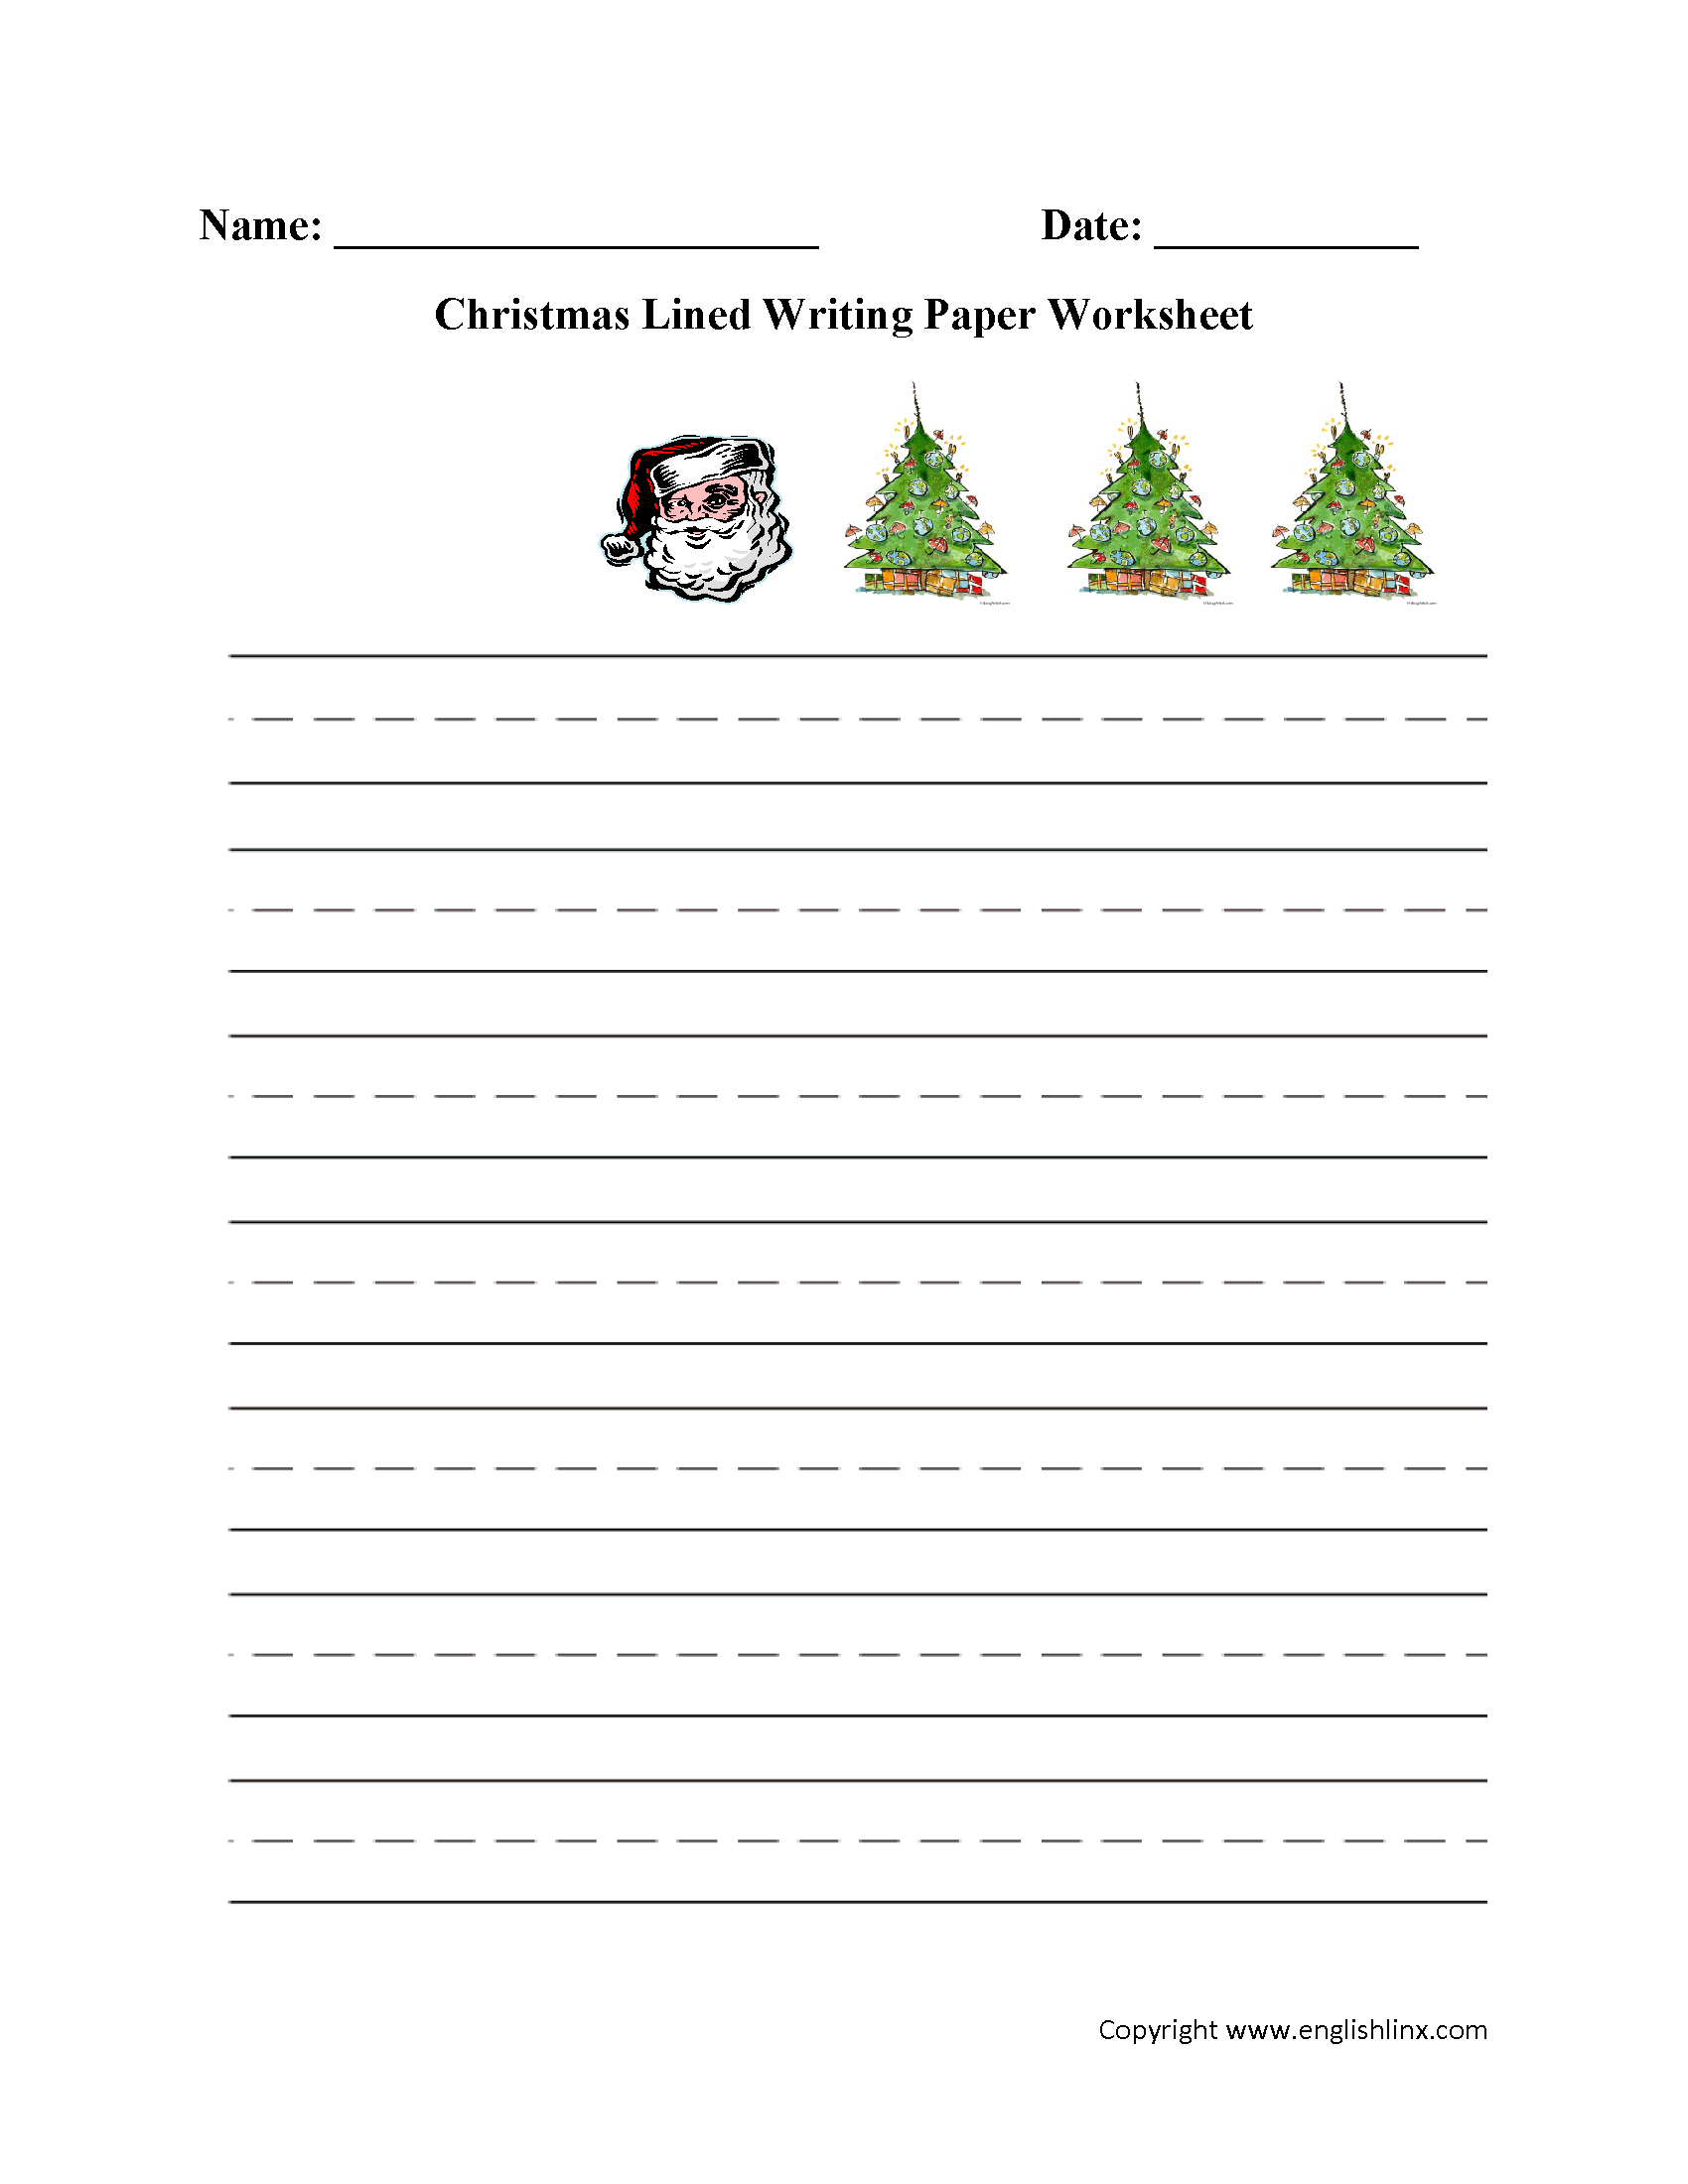 Christmas Lined Writing Paper Worksheet